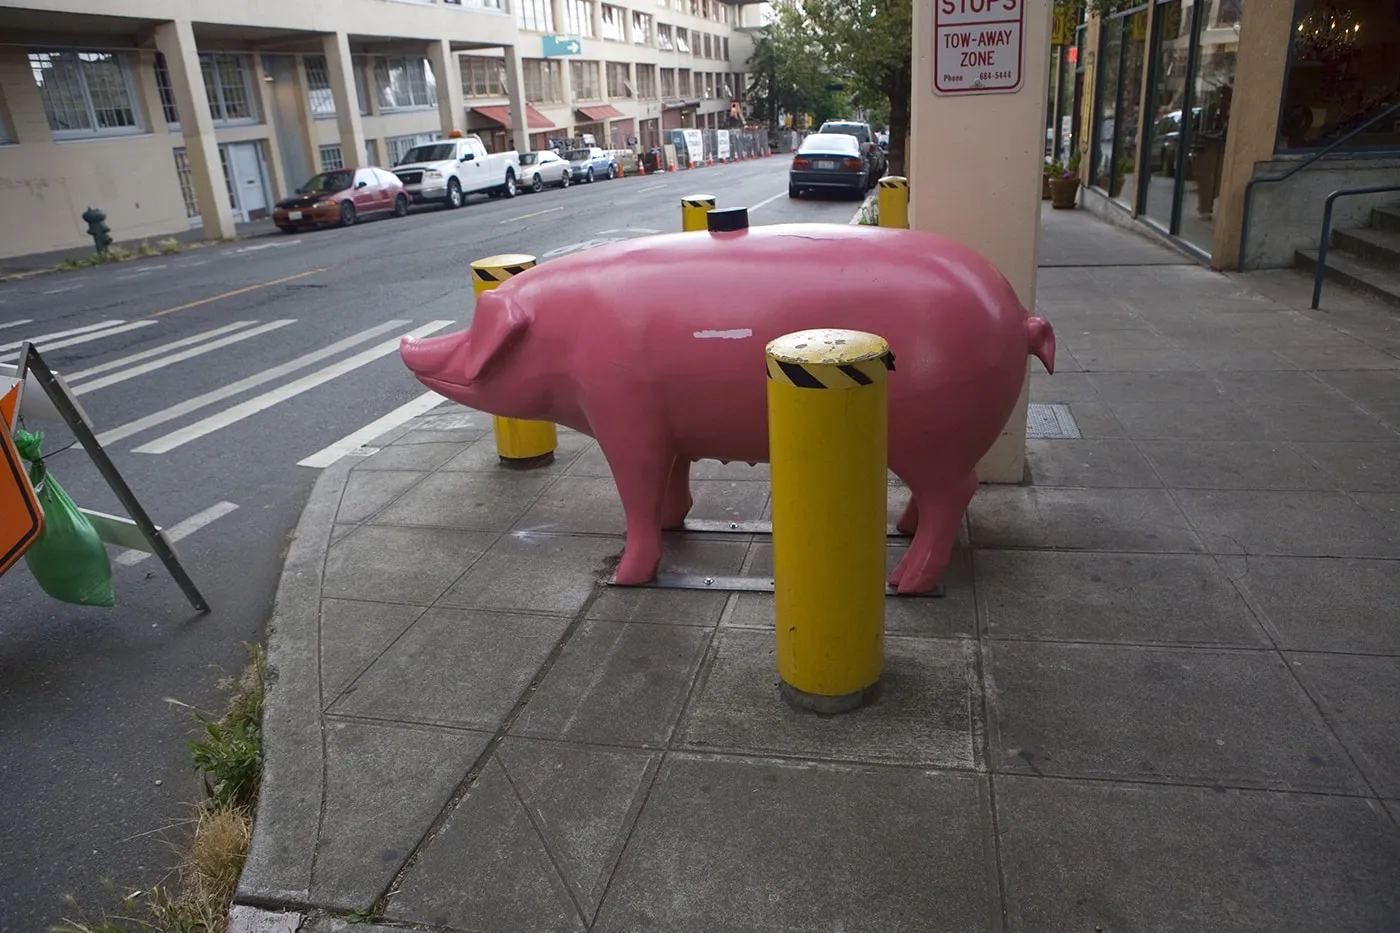 Pigs on Parade - Giant pink pig outside of Pike Place Market in Seattle, Washington.